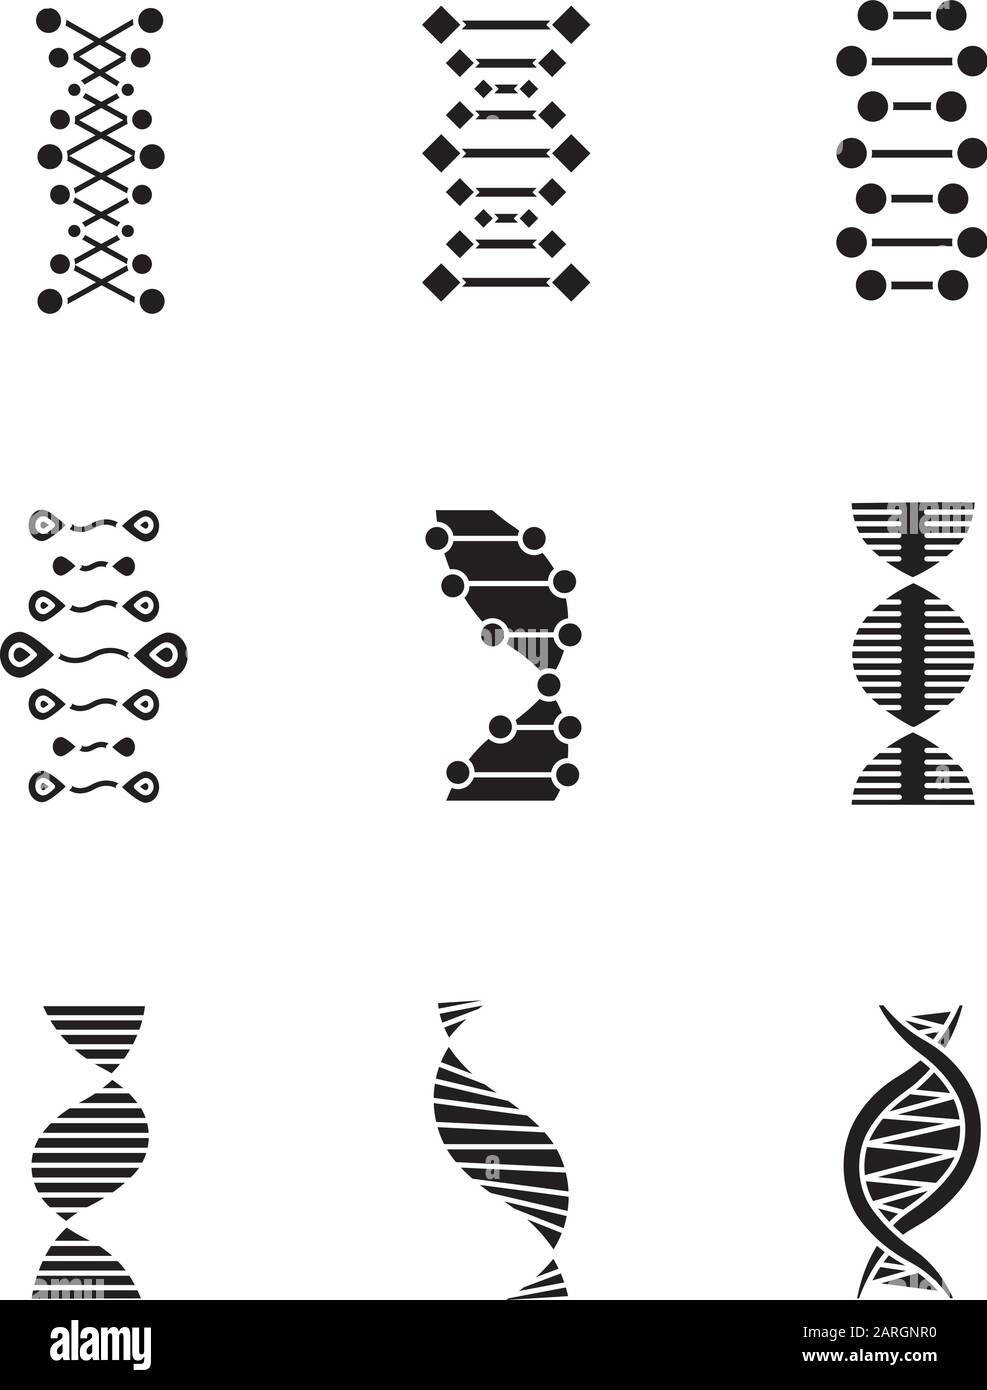 DNA double helix glyph icons set. Deoxyribonucleic, nucleic acid structure. Chromosome. Molecular biology. Genetic code. Genome. Genetics. Medicine. S Stock Vector